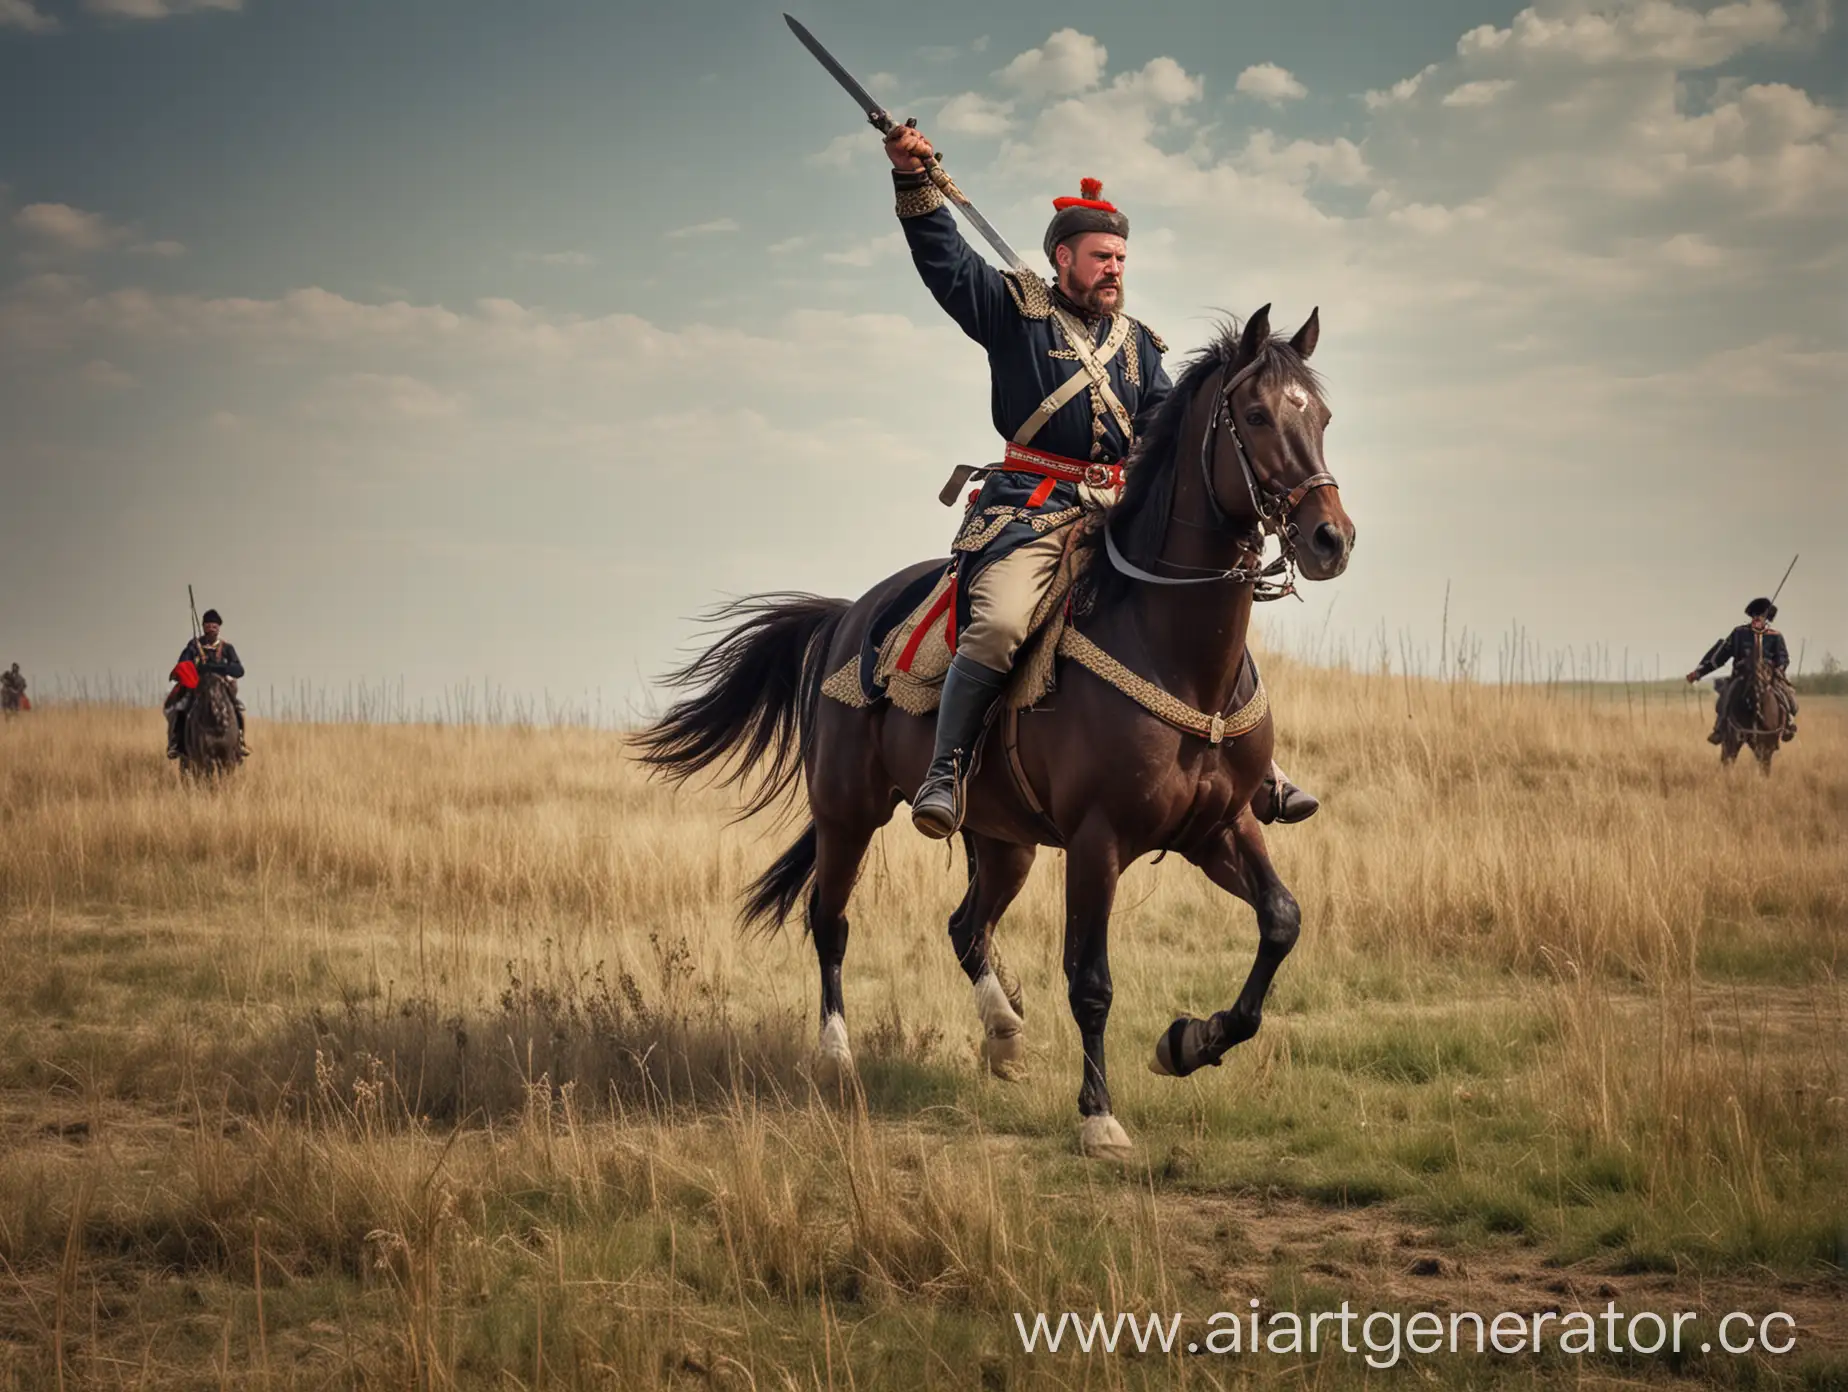 Cossack-of-the-Don-in-Battle-Warrior-with-Raised-Sword-in-Hand